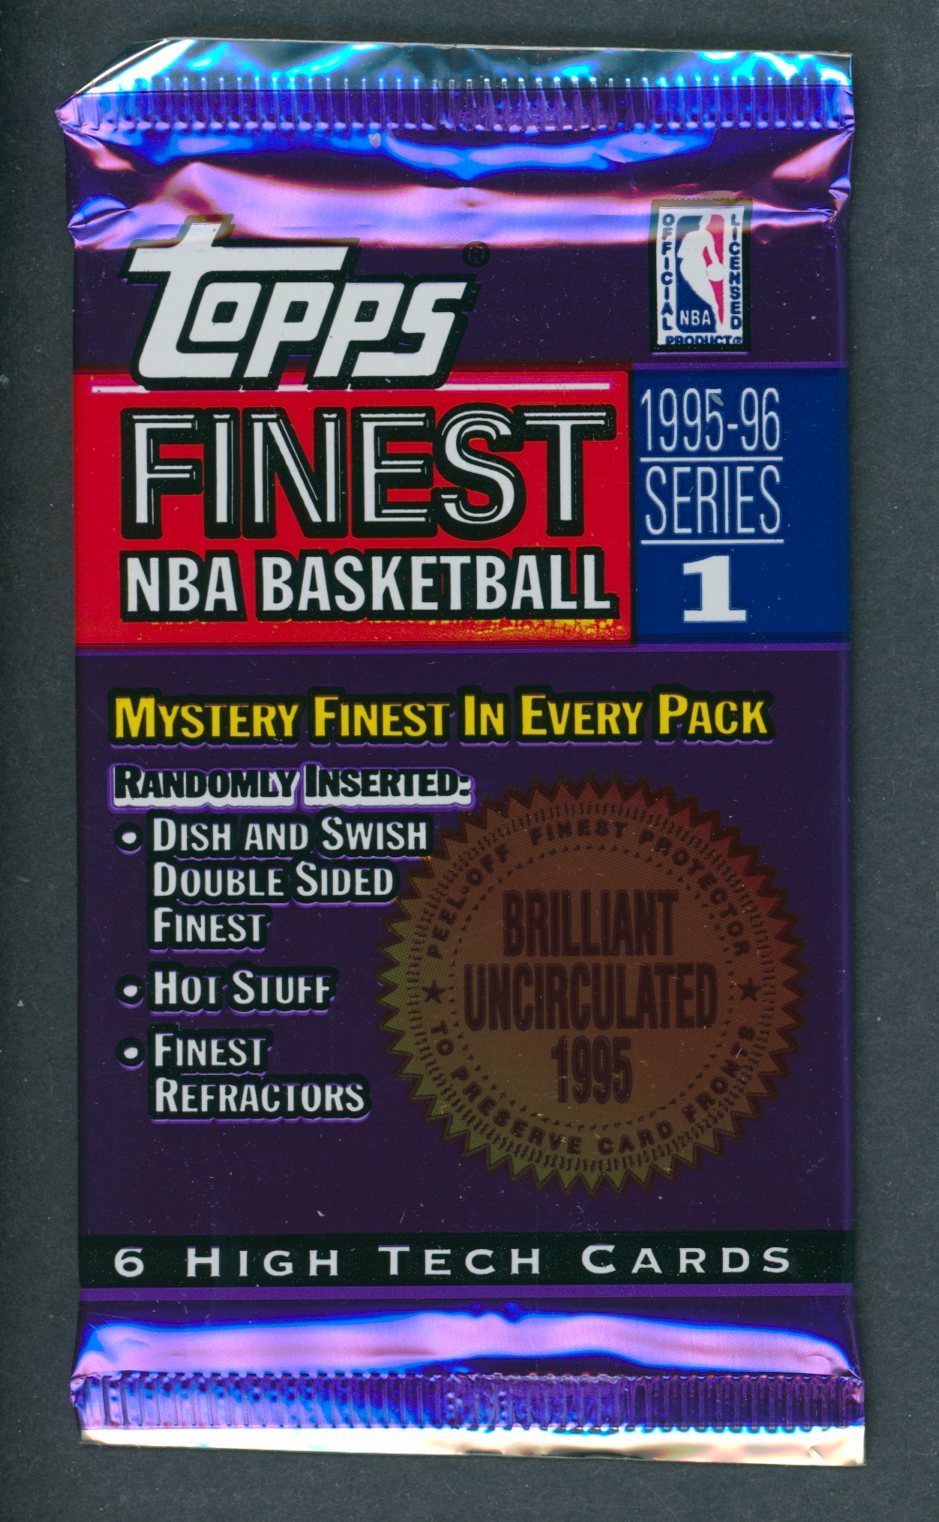 1995/96 Topps Finest Basketball Unopened Series 1 Pack